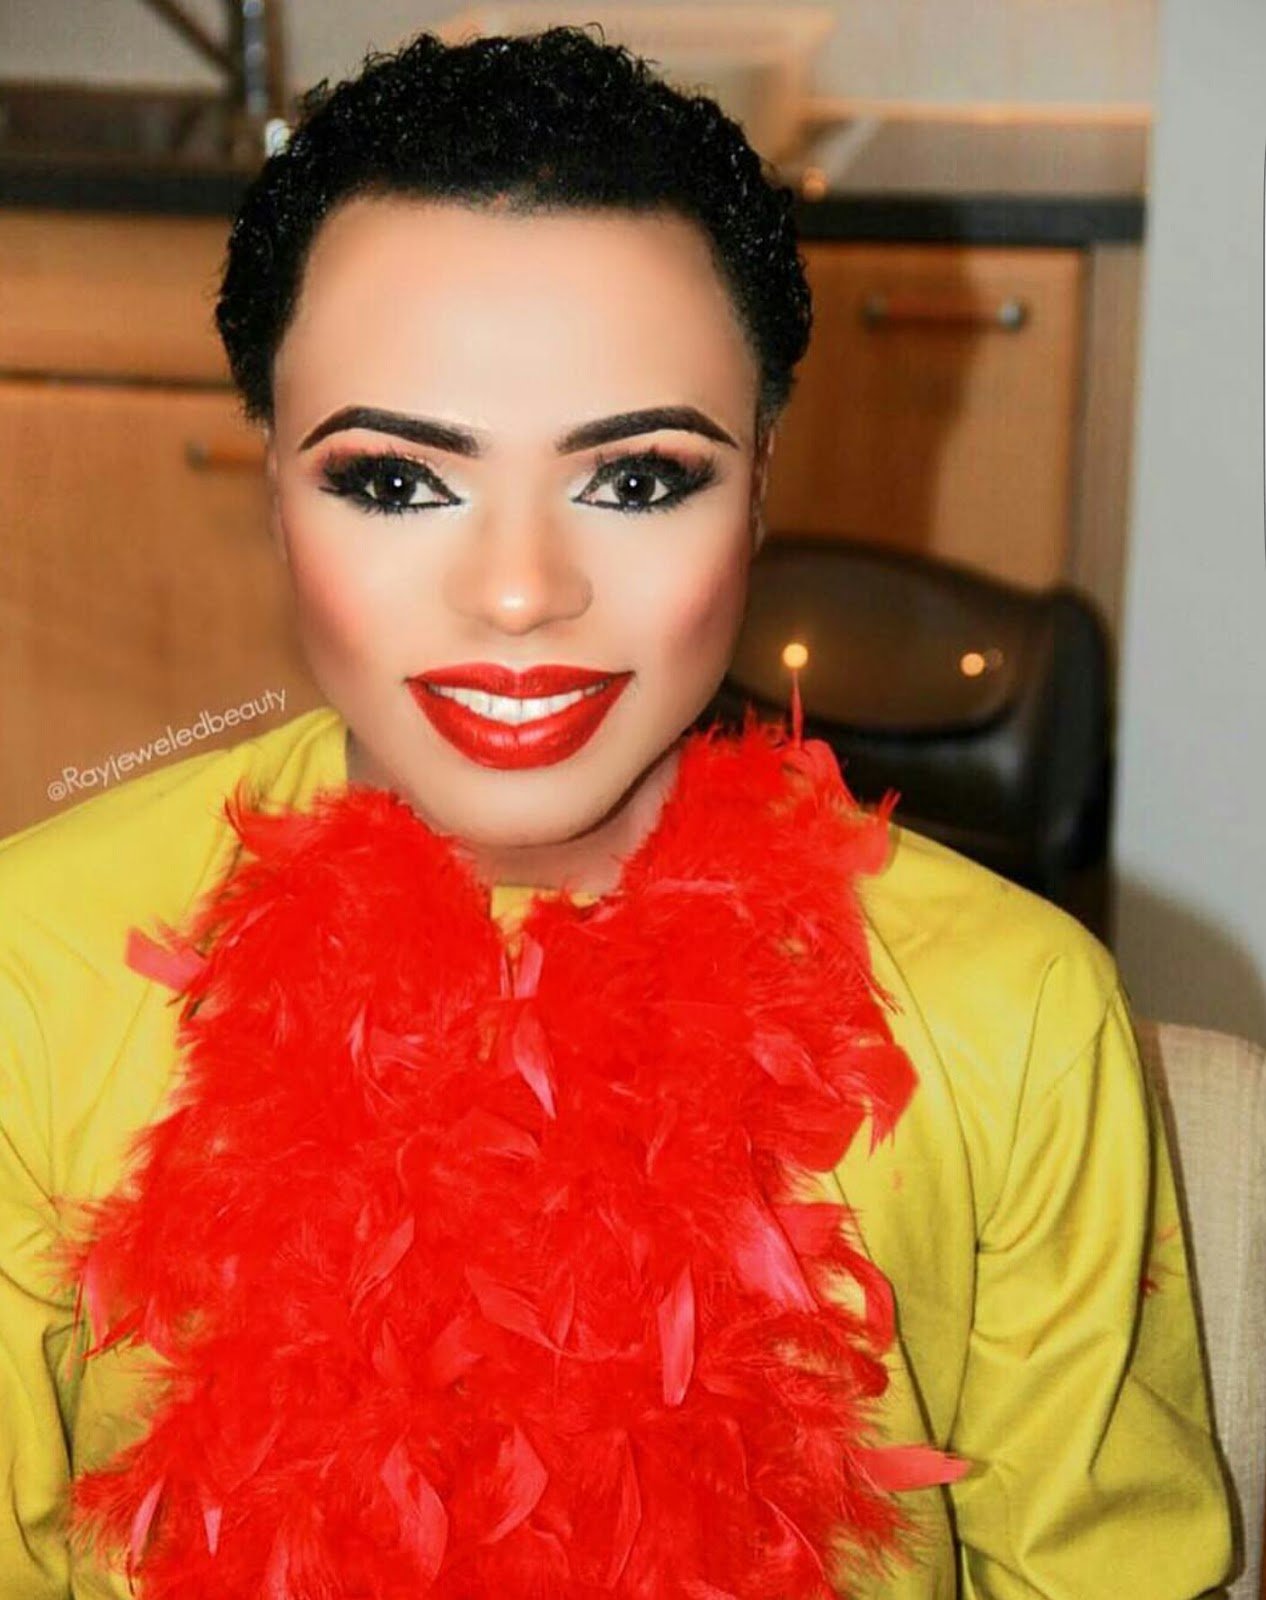 Bobrisky reveals that Toyin Lawani arrested him for theft